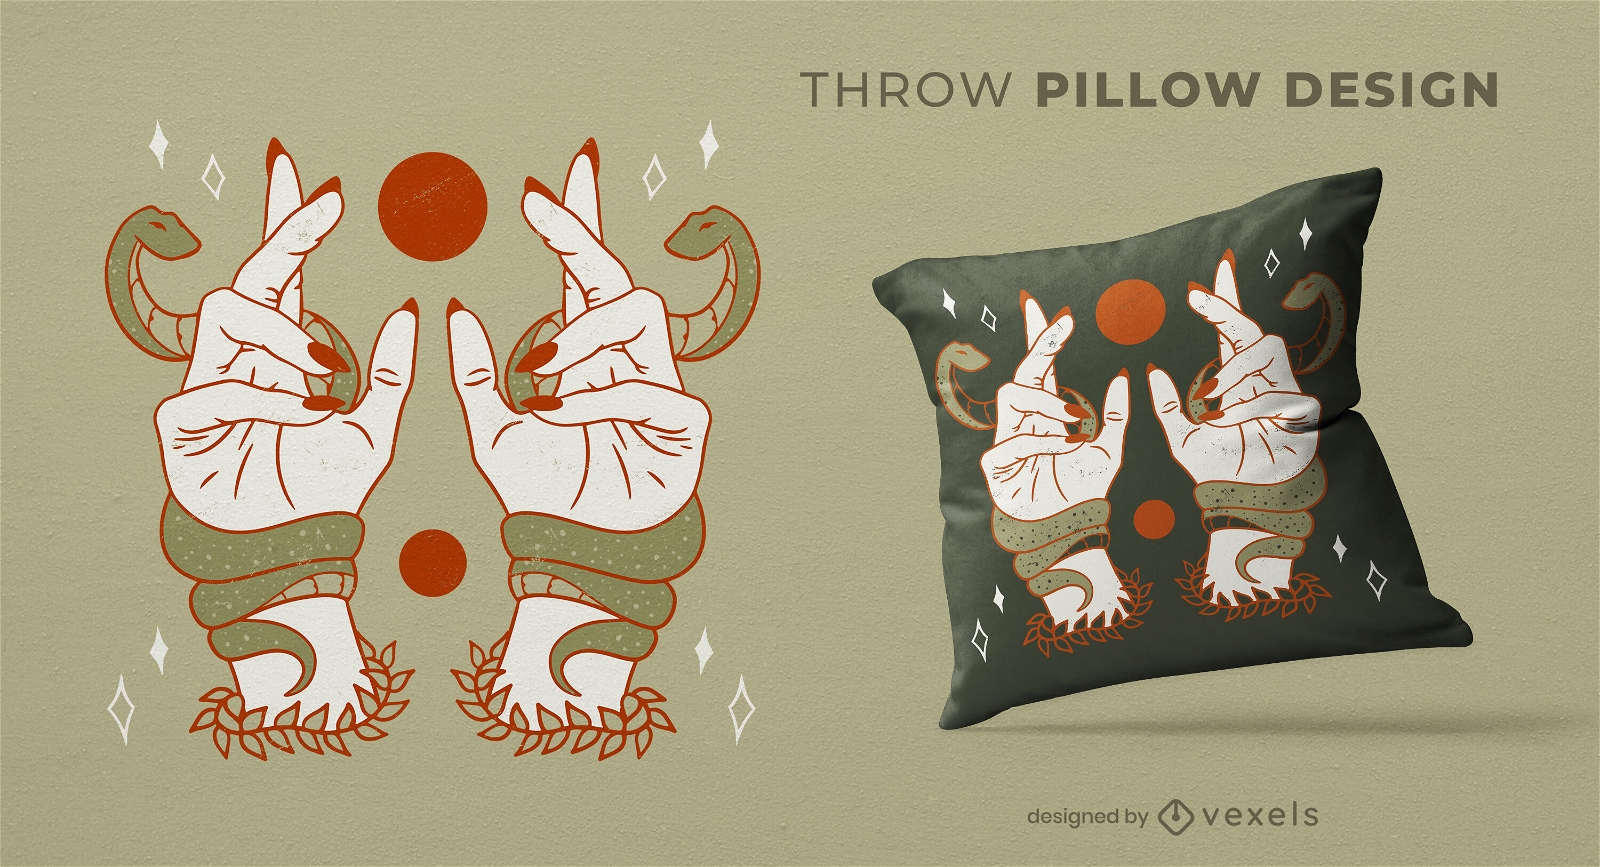 Hands and snakes throw pillow design